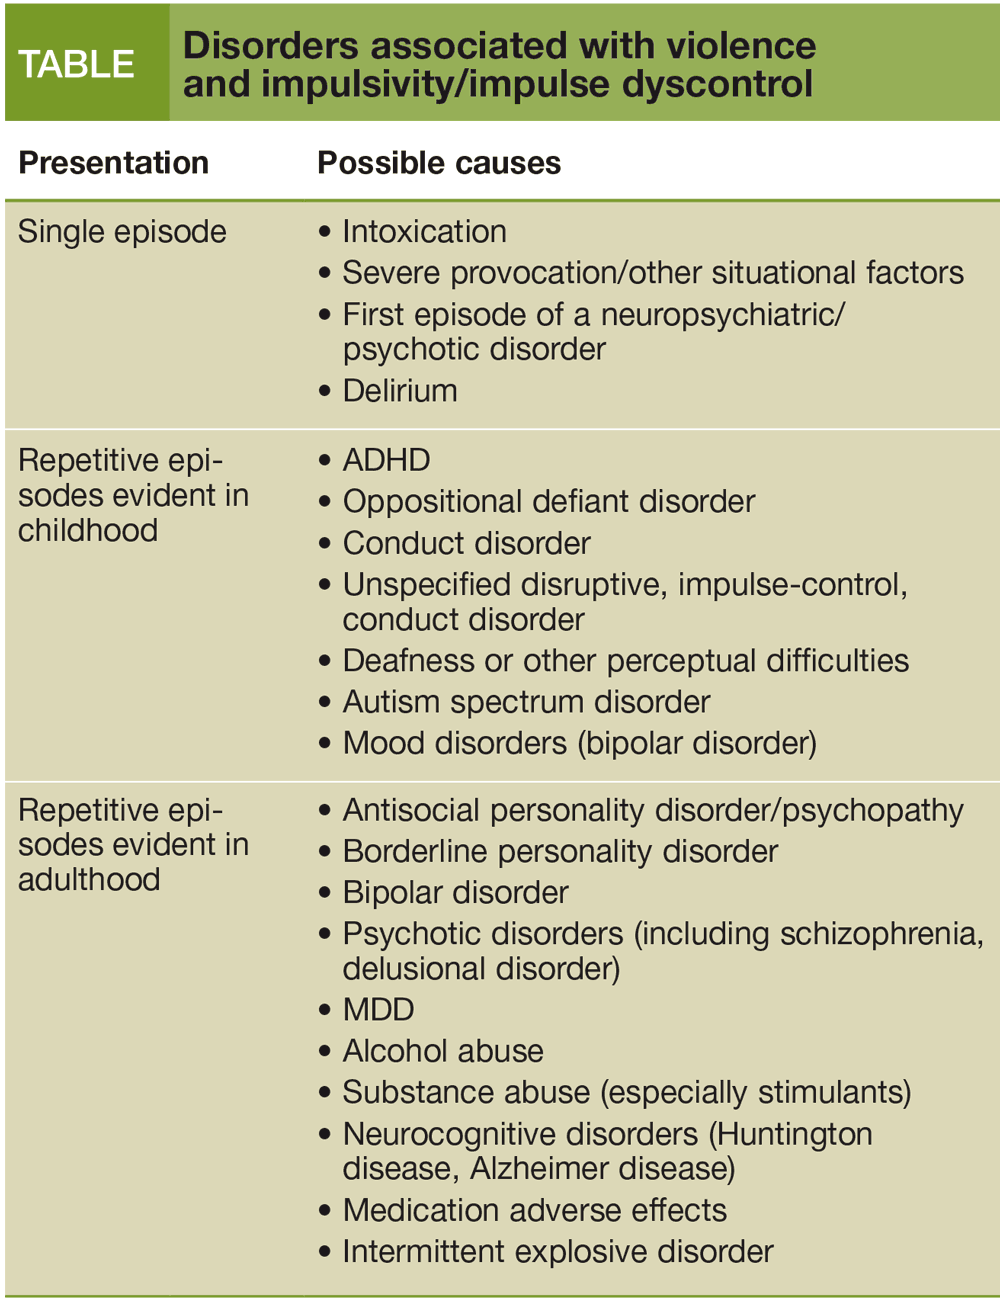 Disorders associated with violence and impulsivity/impulse dyscontrol